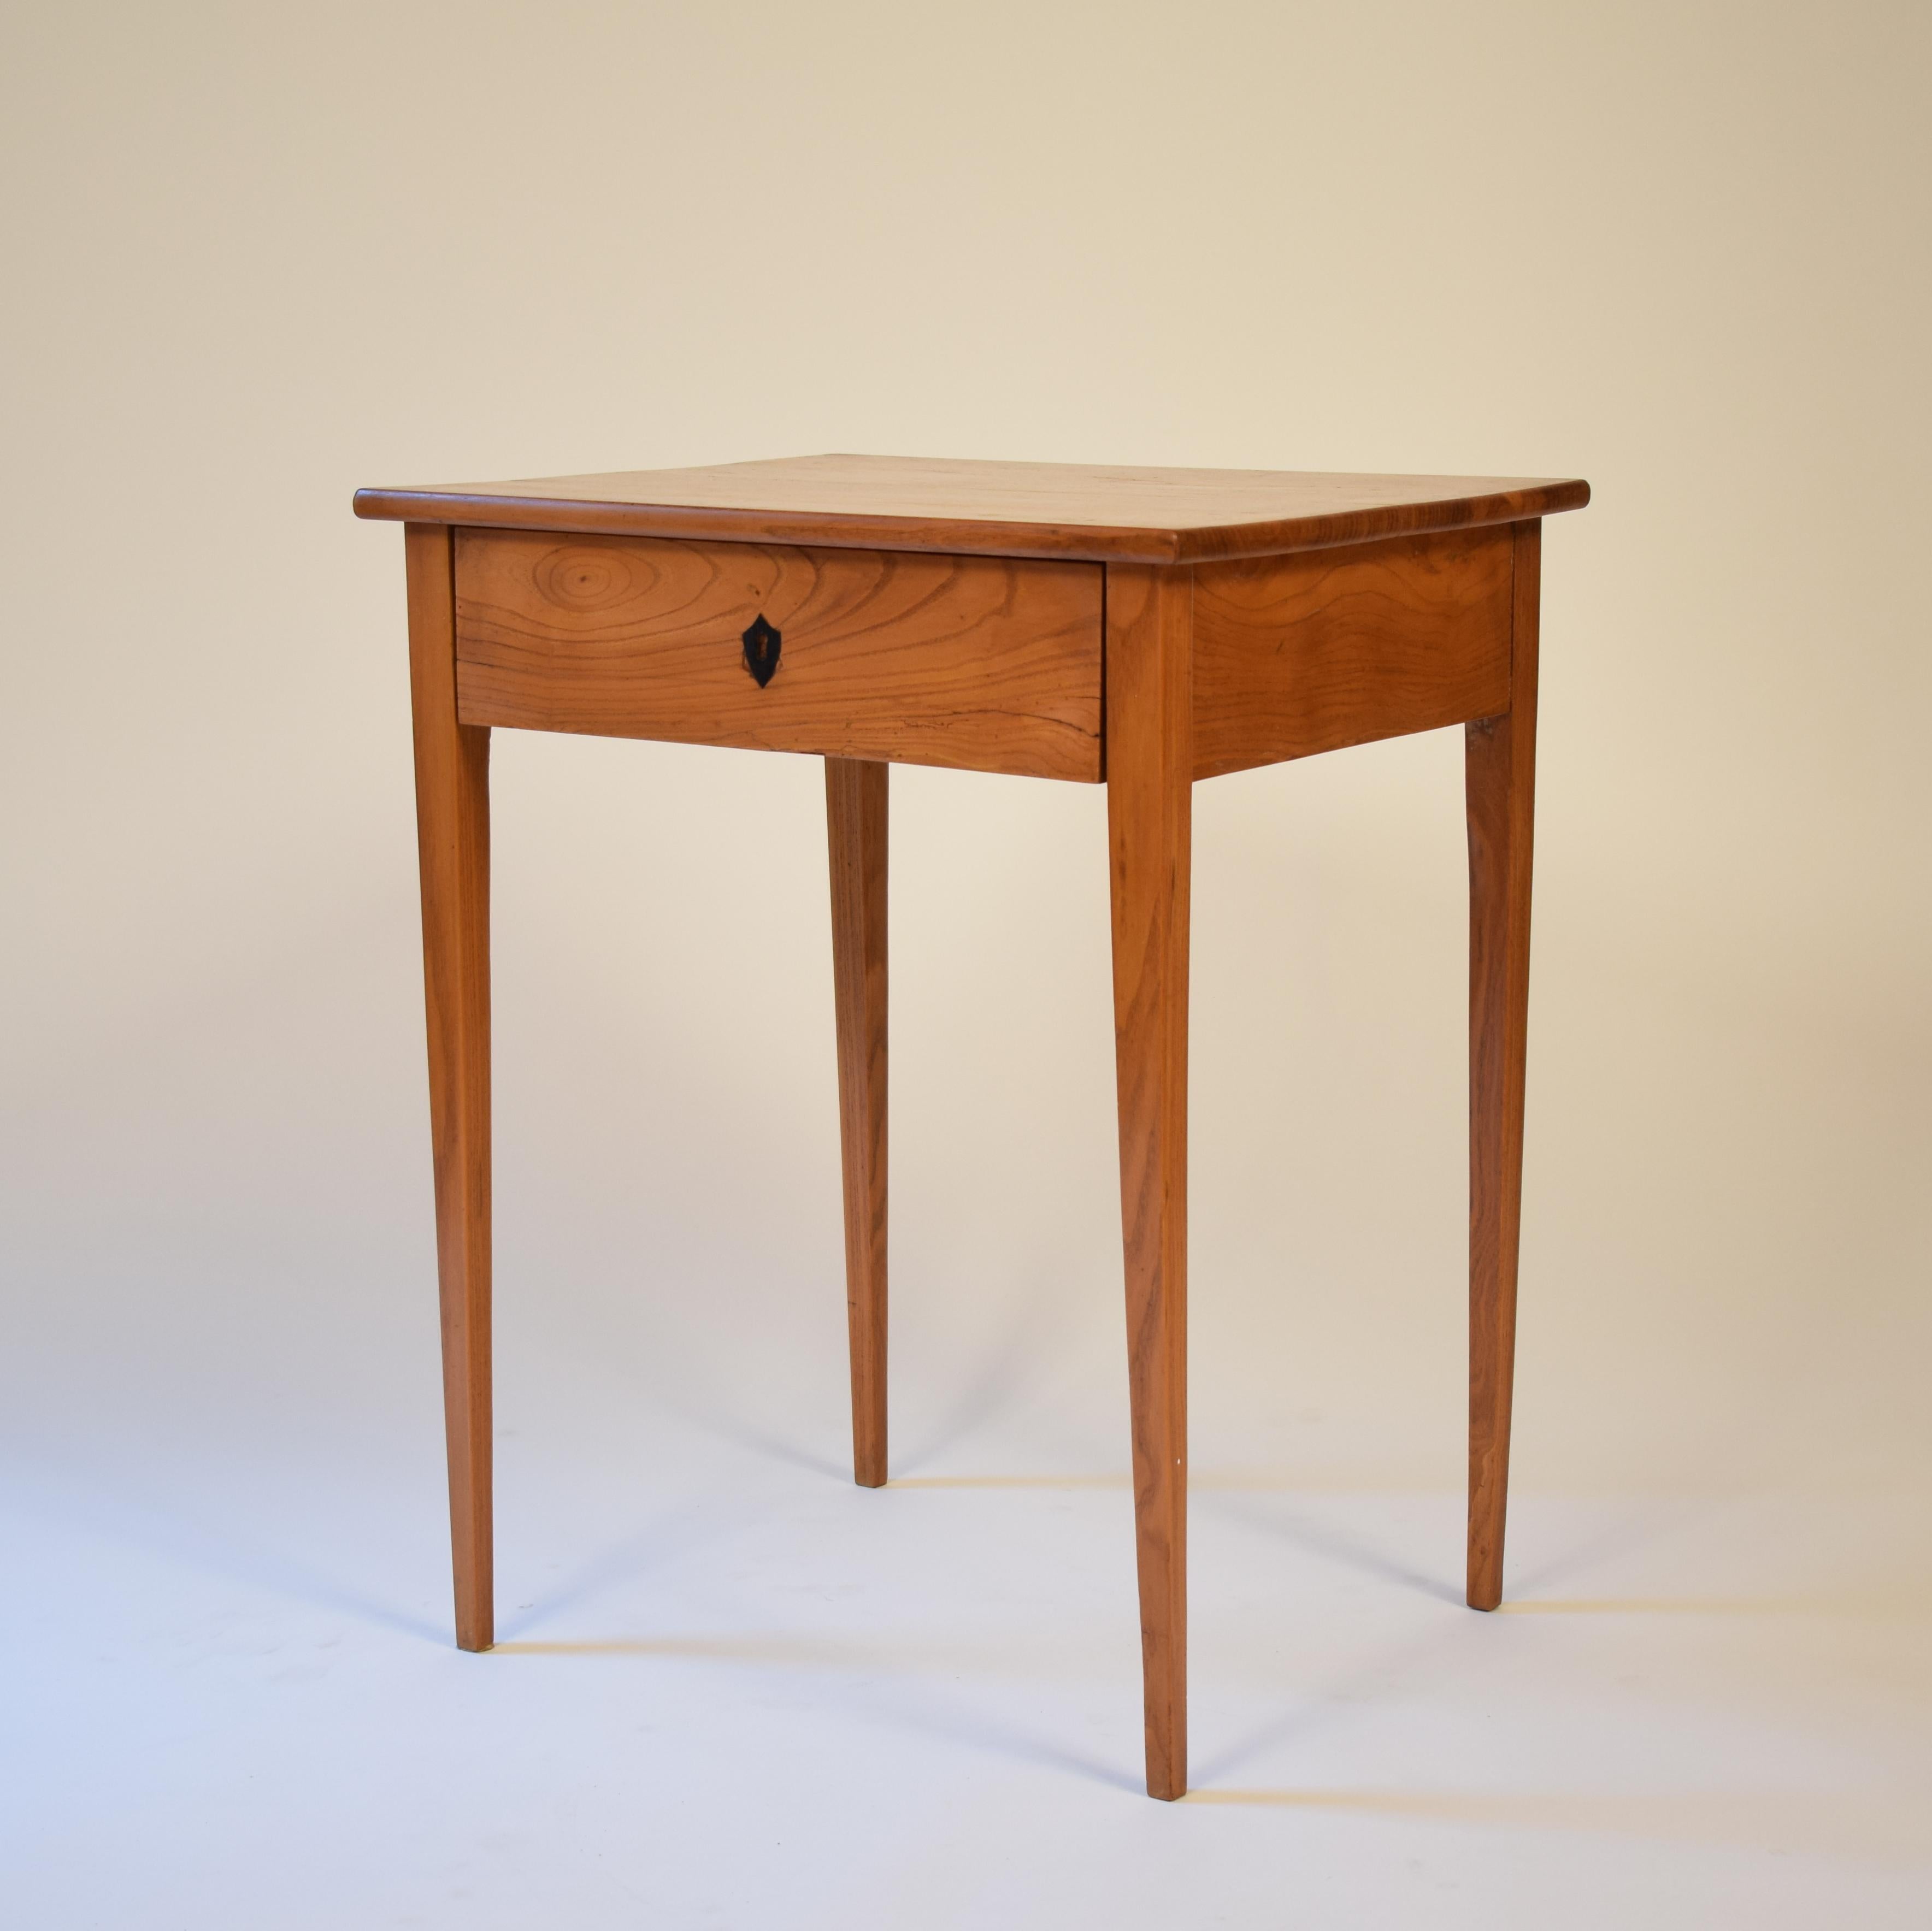 This elegant Biedermeier side table was made circa 1820 in Germany. The table is made out of solid ash wood. The tapered legs are very beautiful. The table has one drawer.
The table is in very nice original condition and has got a nice Patina.